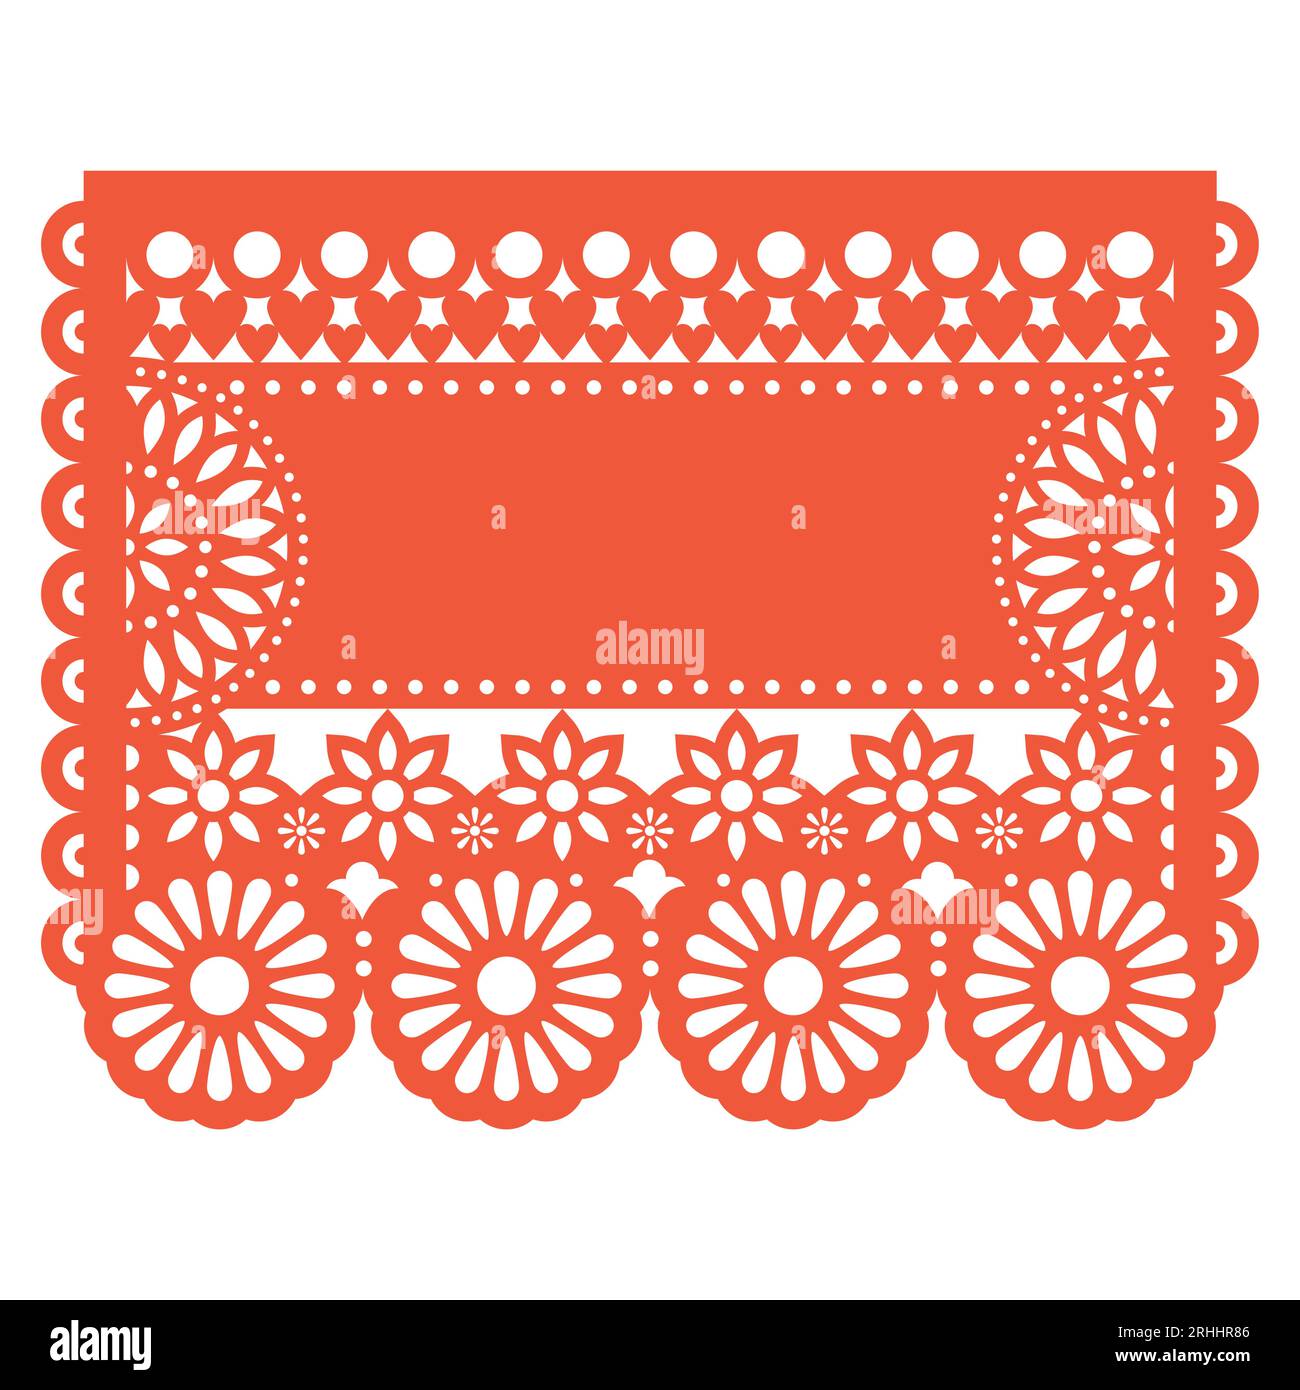 Papel Picado vector floral template design with empty space for text, Mexican party paper decorations pattern in orange, Stock Vector